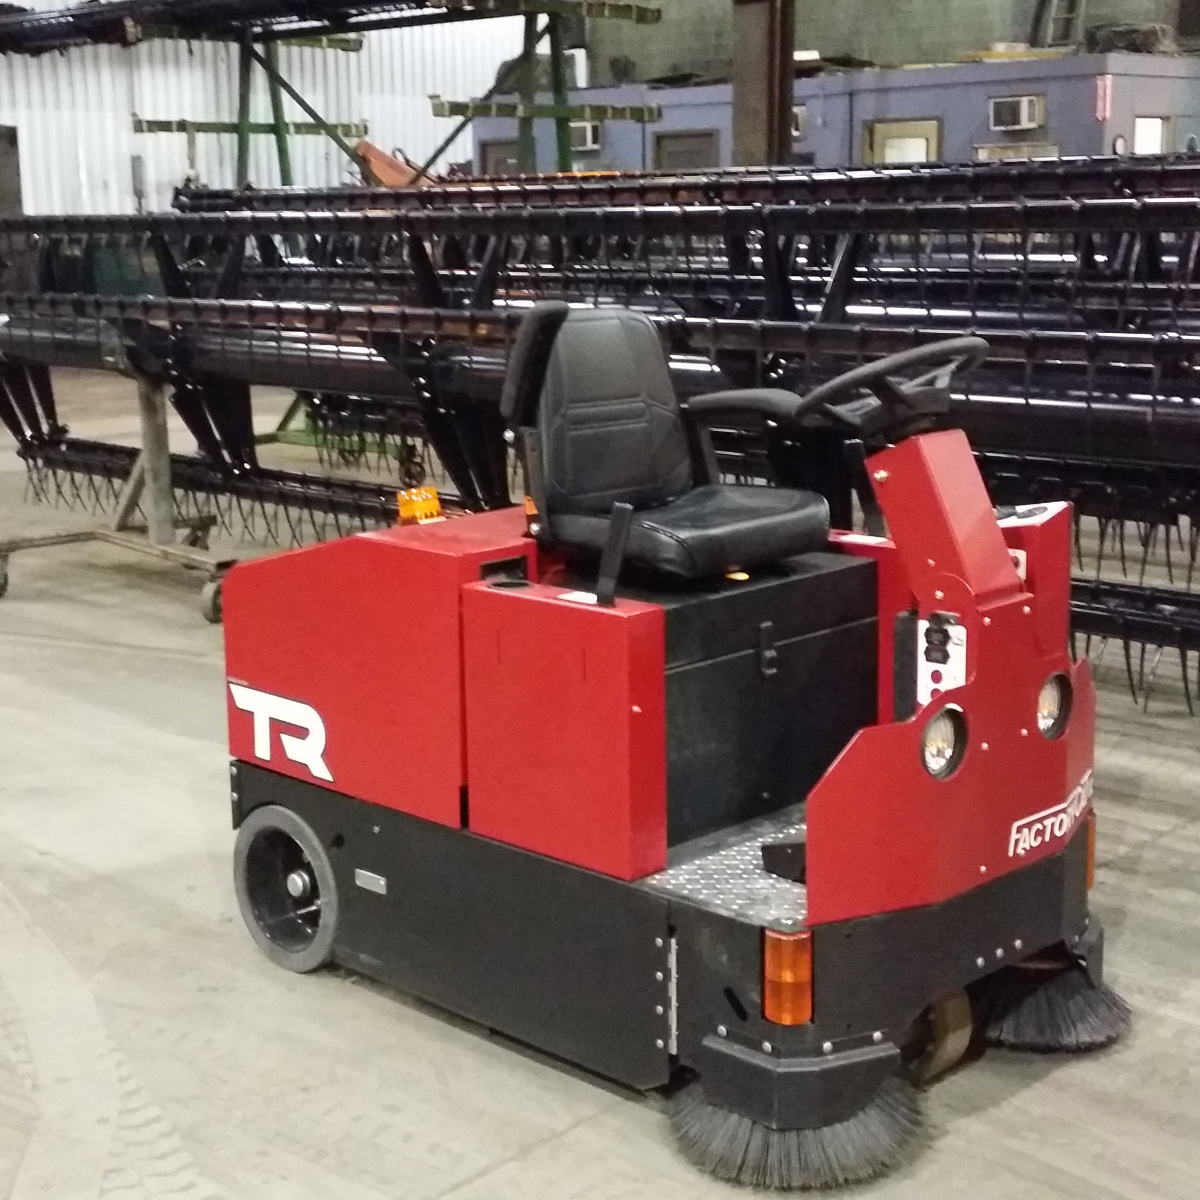 The Red Factory Cat TR Rider is cleaning an industrial floor